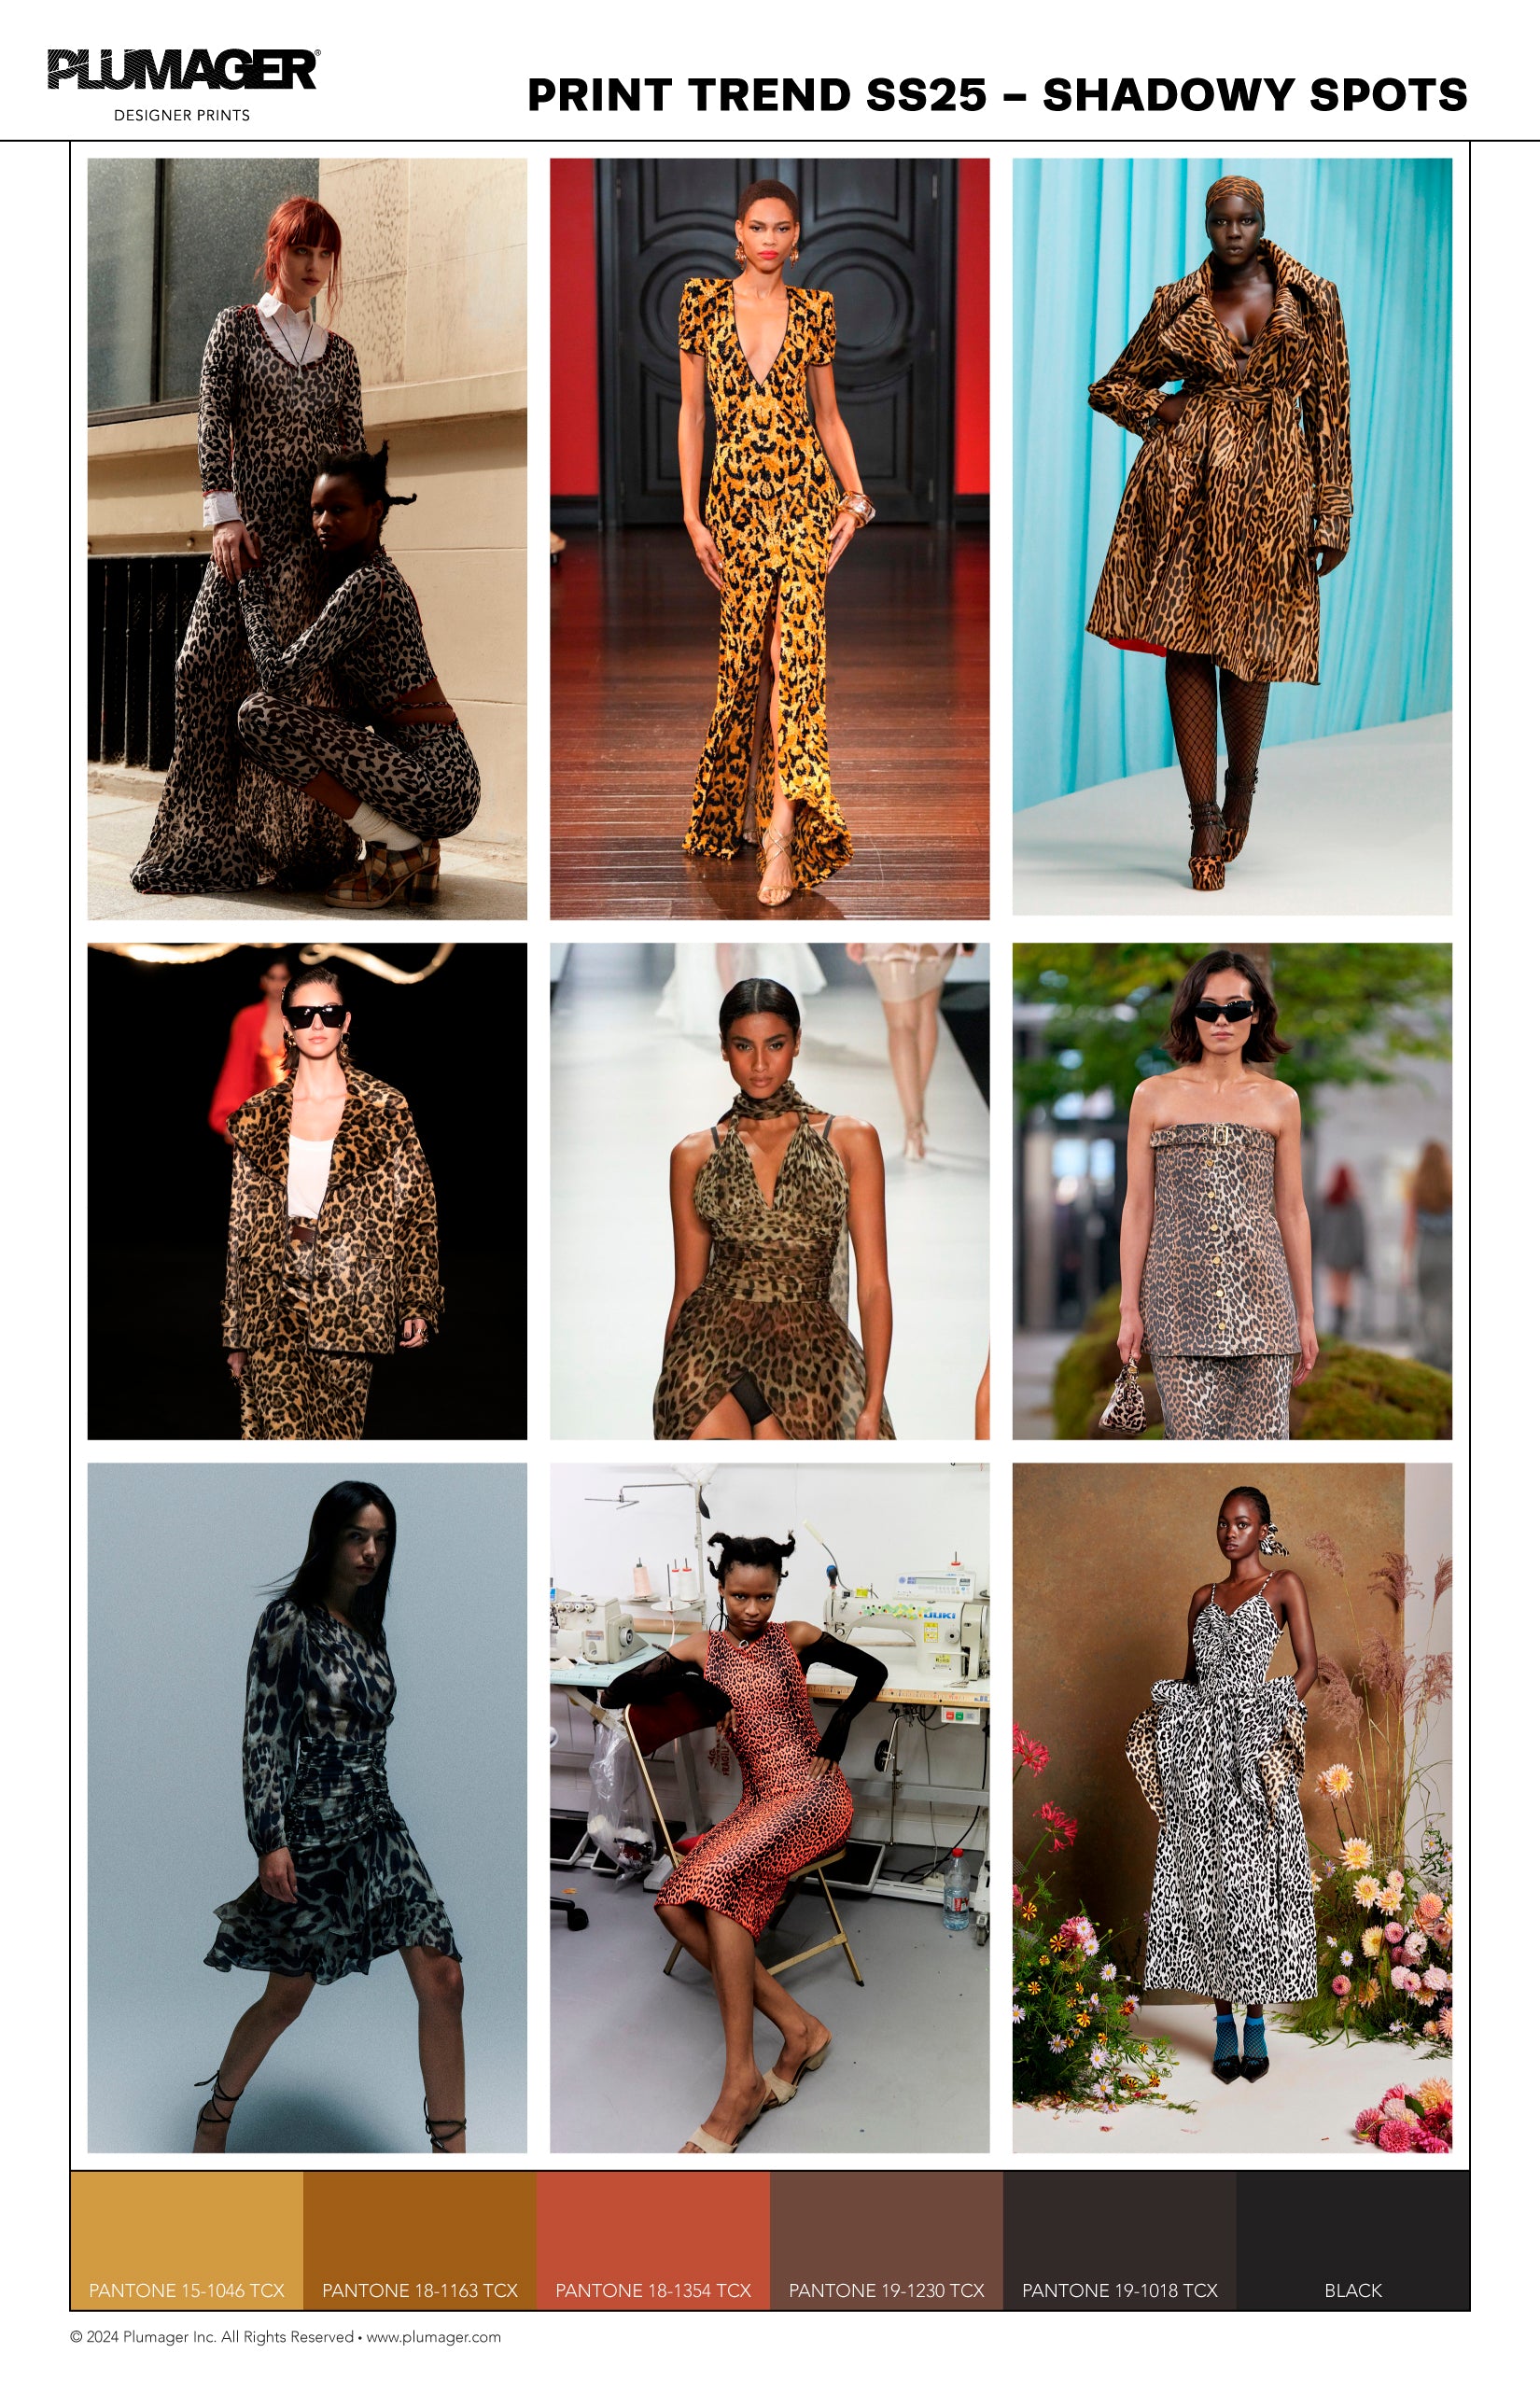 SS25 Print Textile Color Trend Report - Shadowy Spots